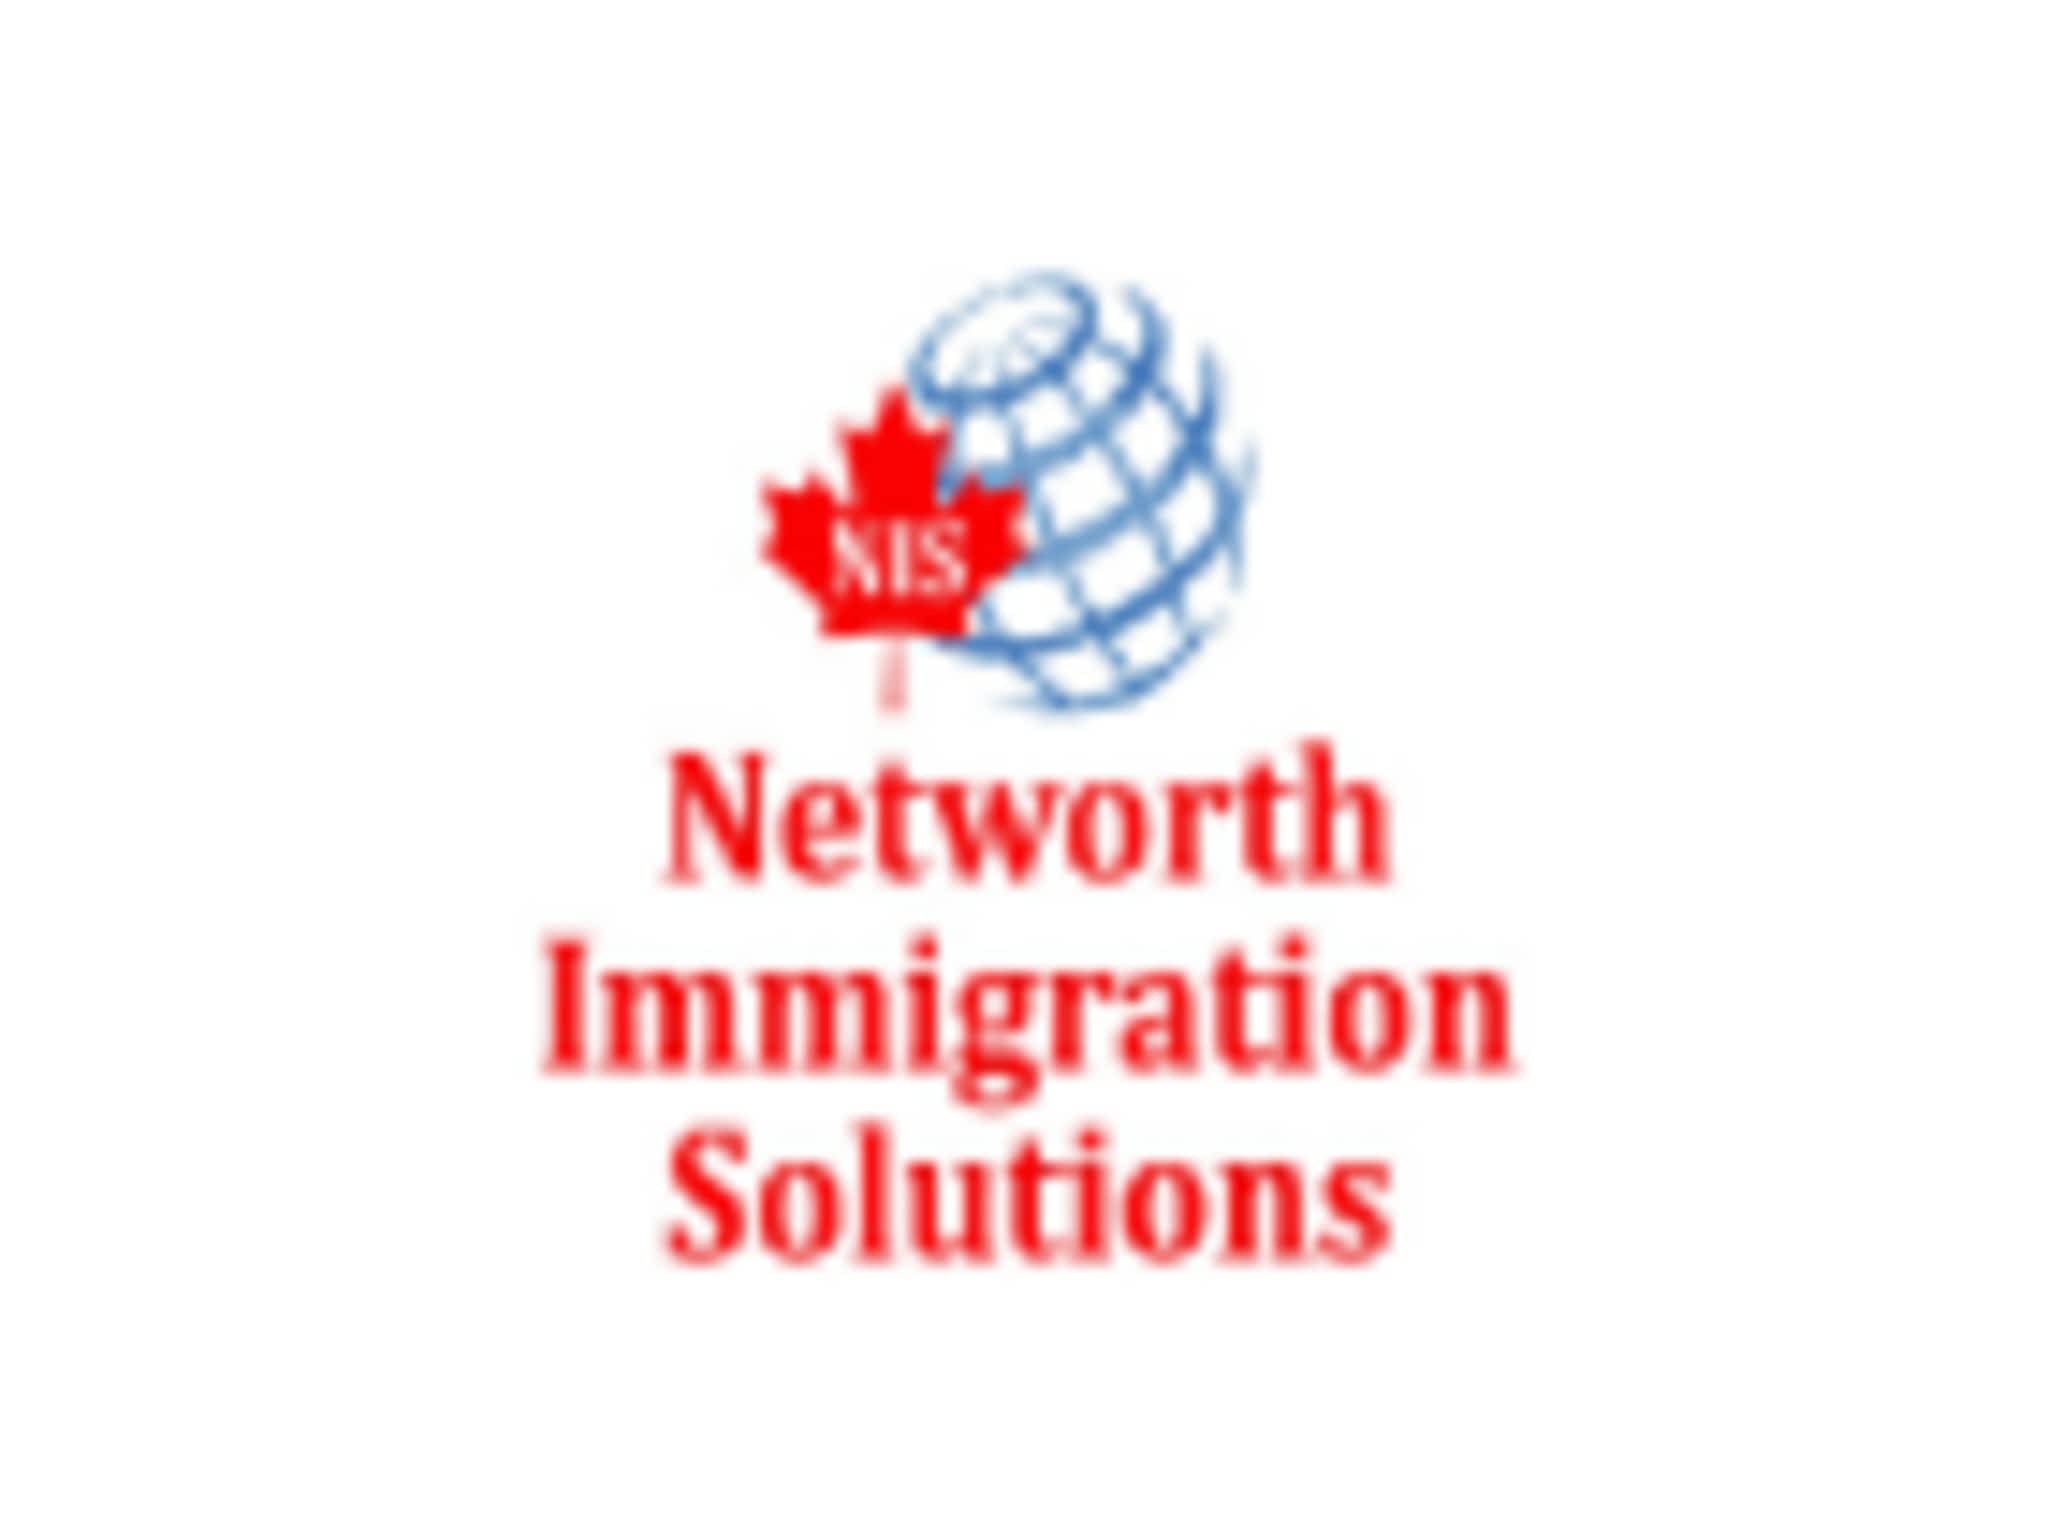 photo Networth Immigration Solutions